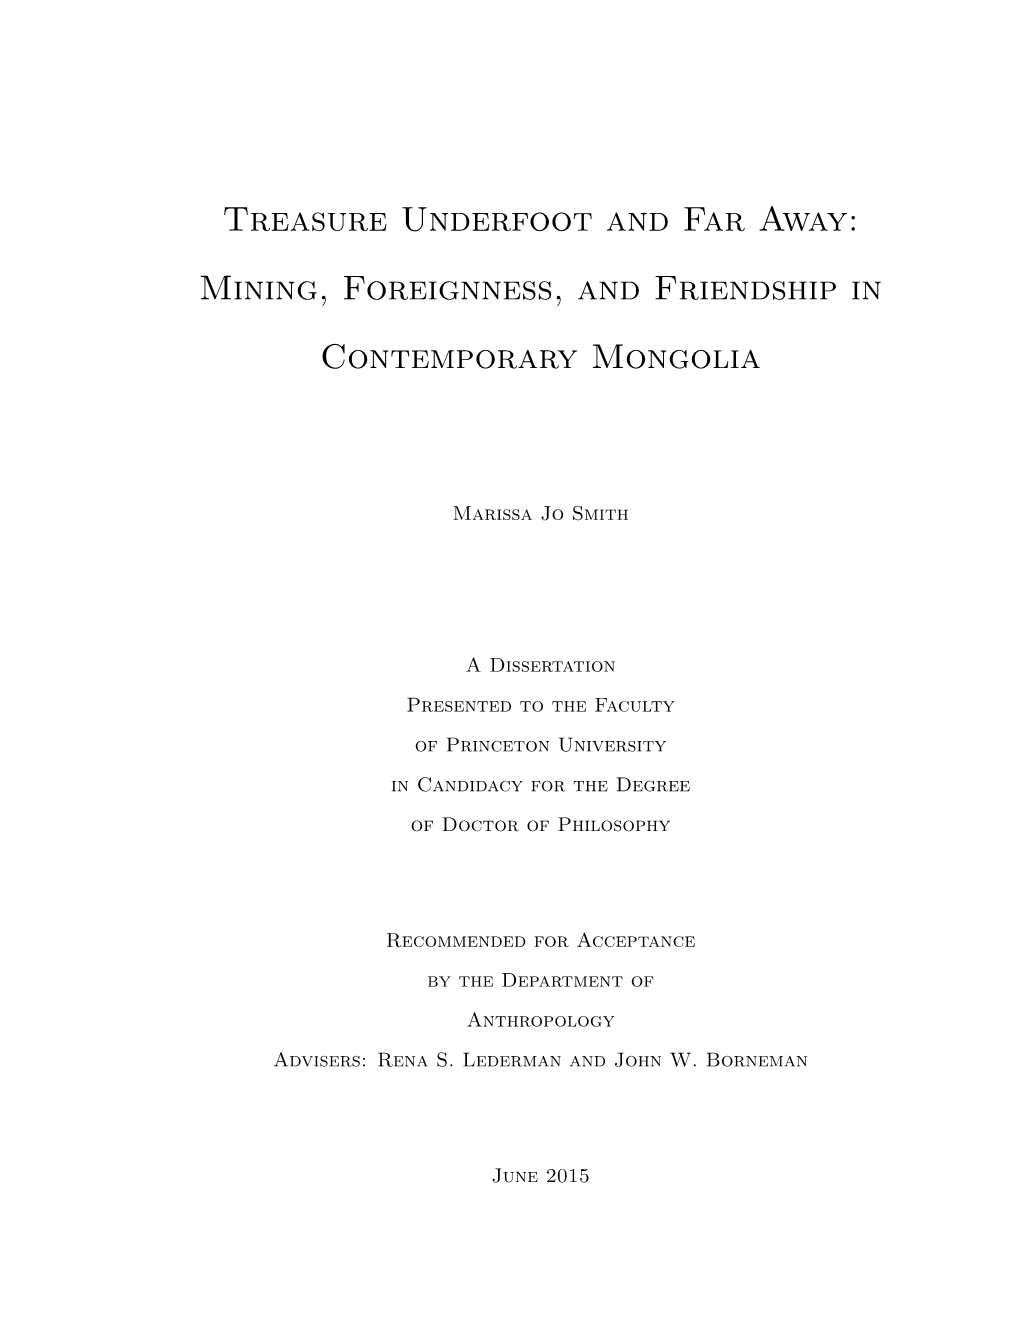 Mining, Foreignness, and Friendship in Contemporary Mongolia